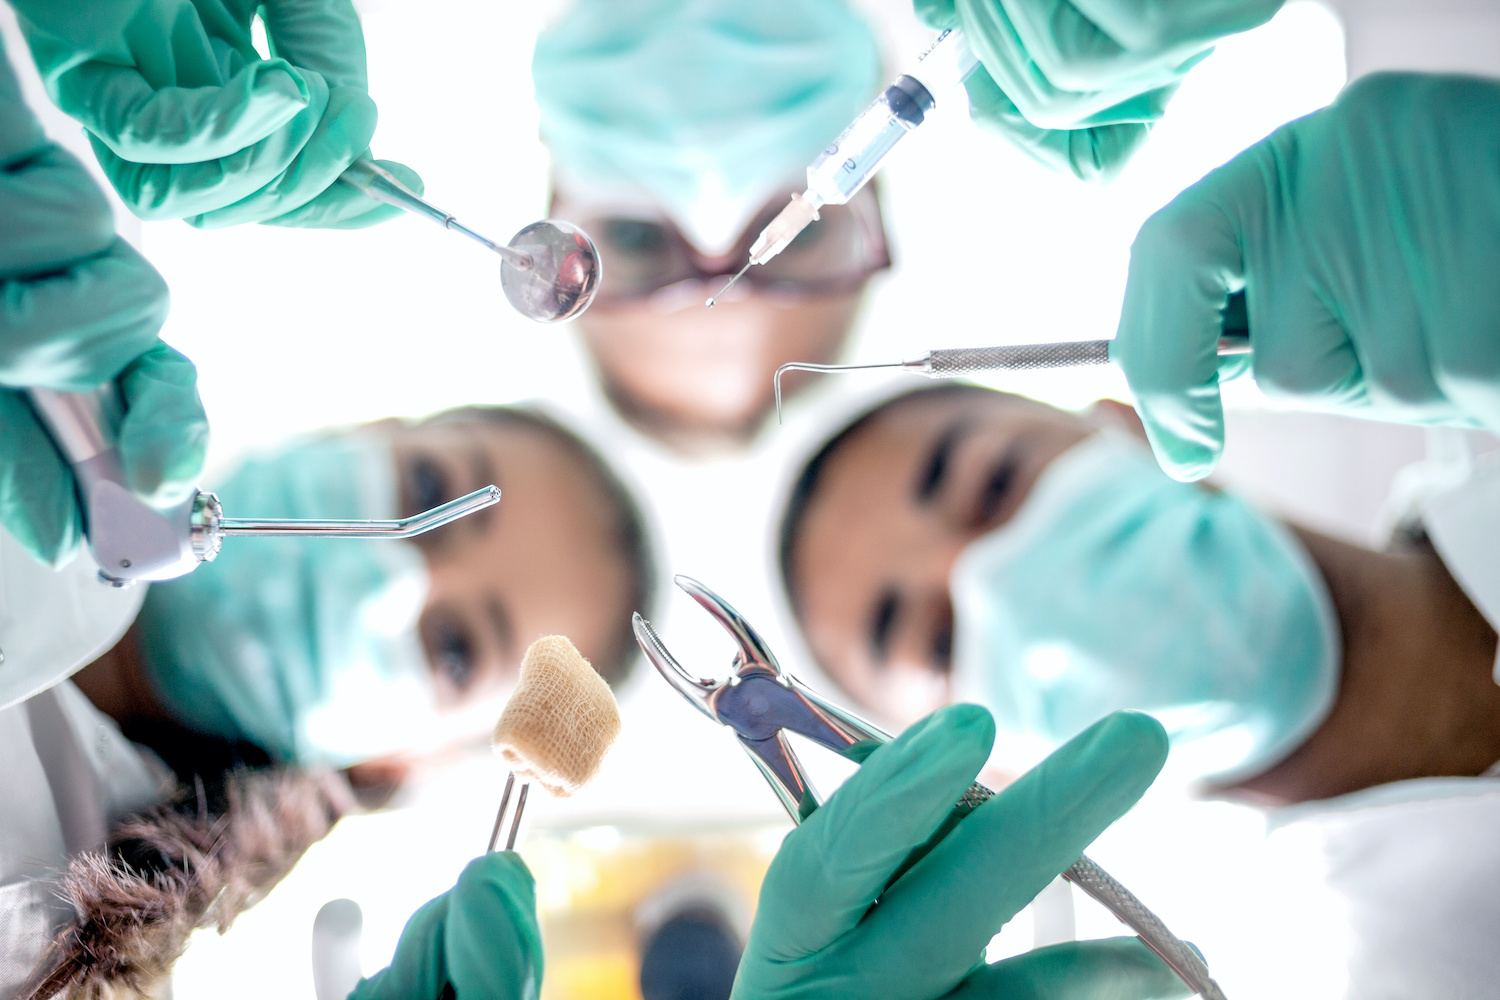 Looking up into the masked faces of several dentists performing oral surgery